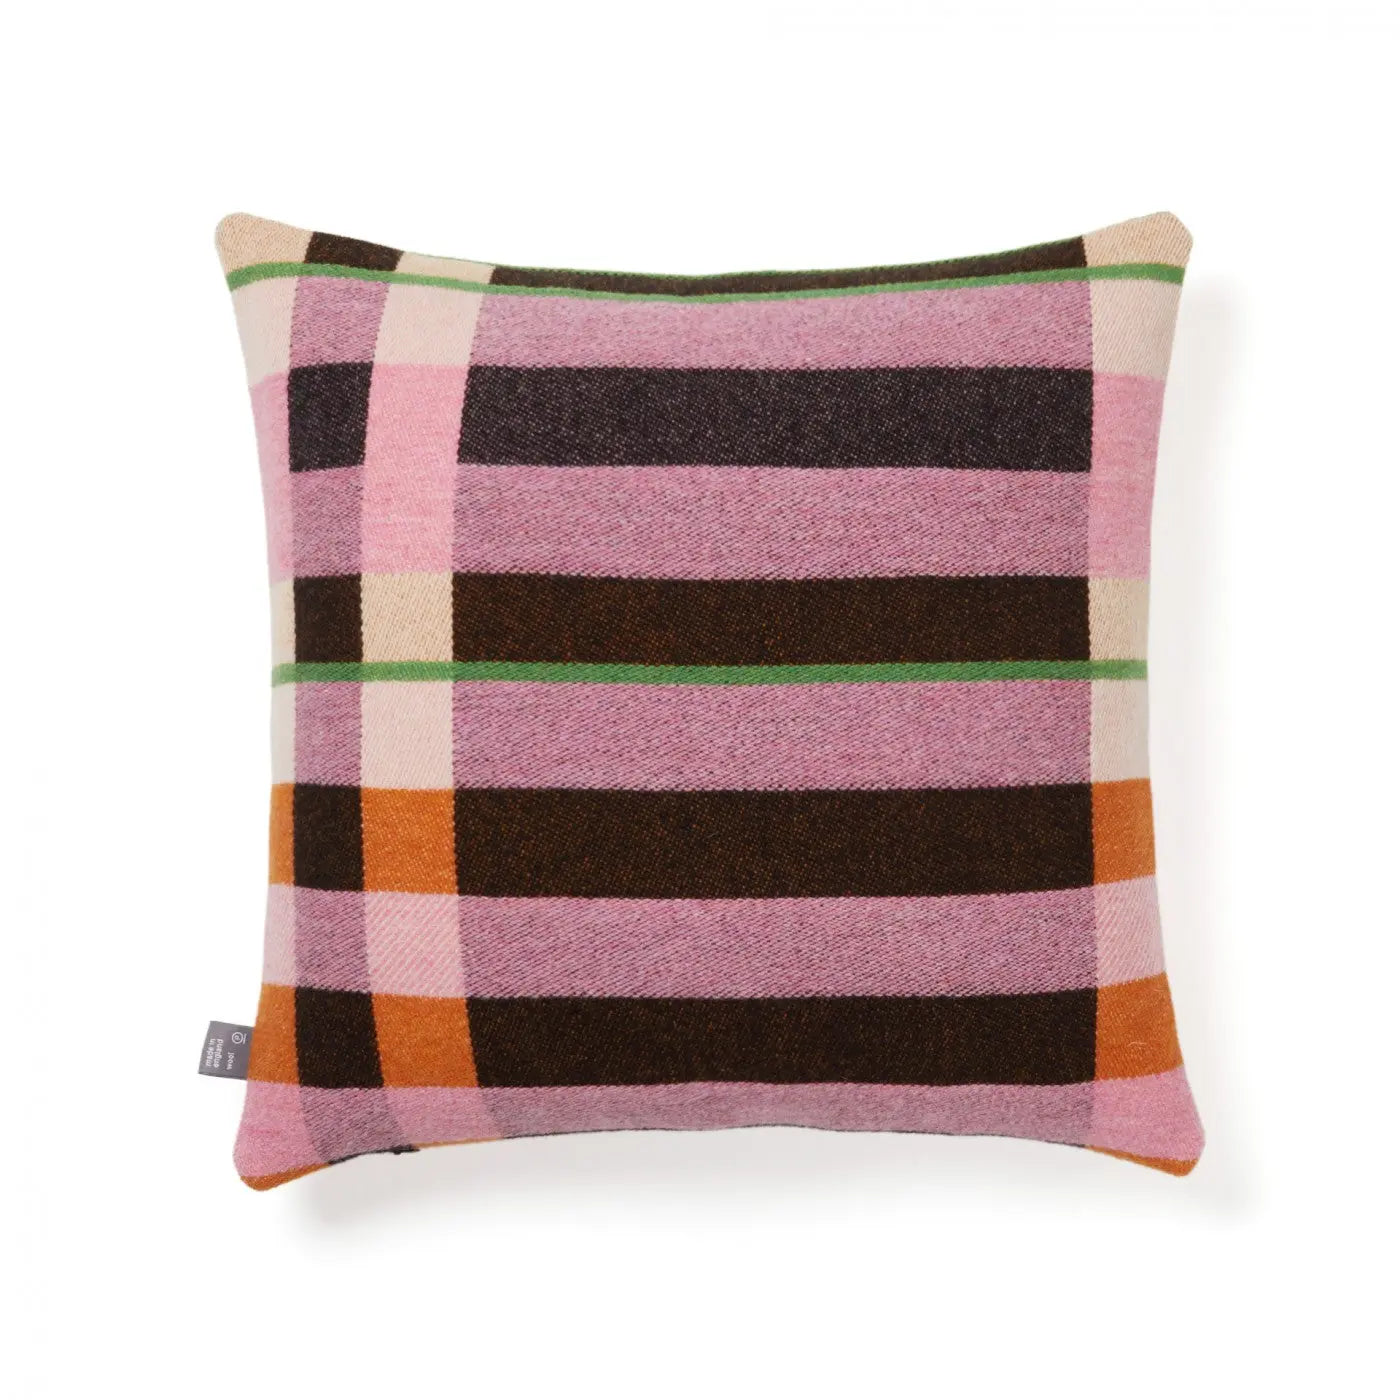 Wallace and Sewell-Stolzl Nougat Cushion Wallace & Sewell